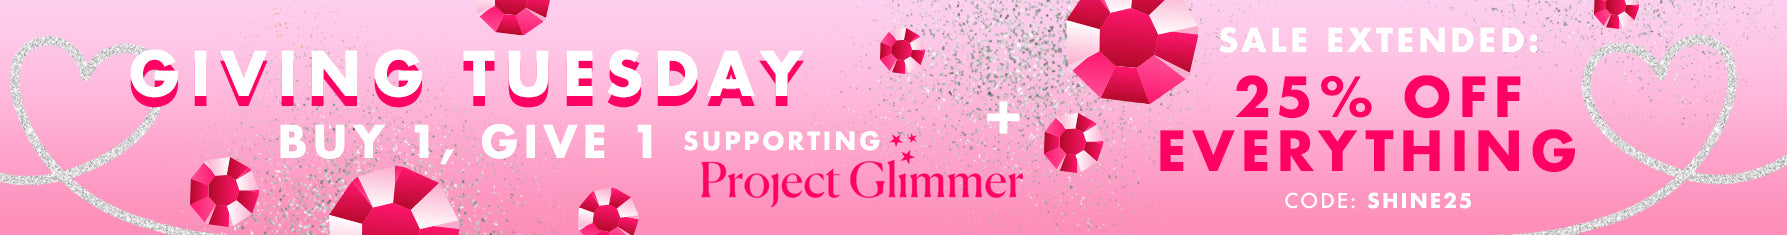 Sale extended 25%off everything code: shine25 - Giving Tuesday, buy 1 give 1, supporting project glimmer